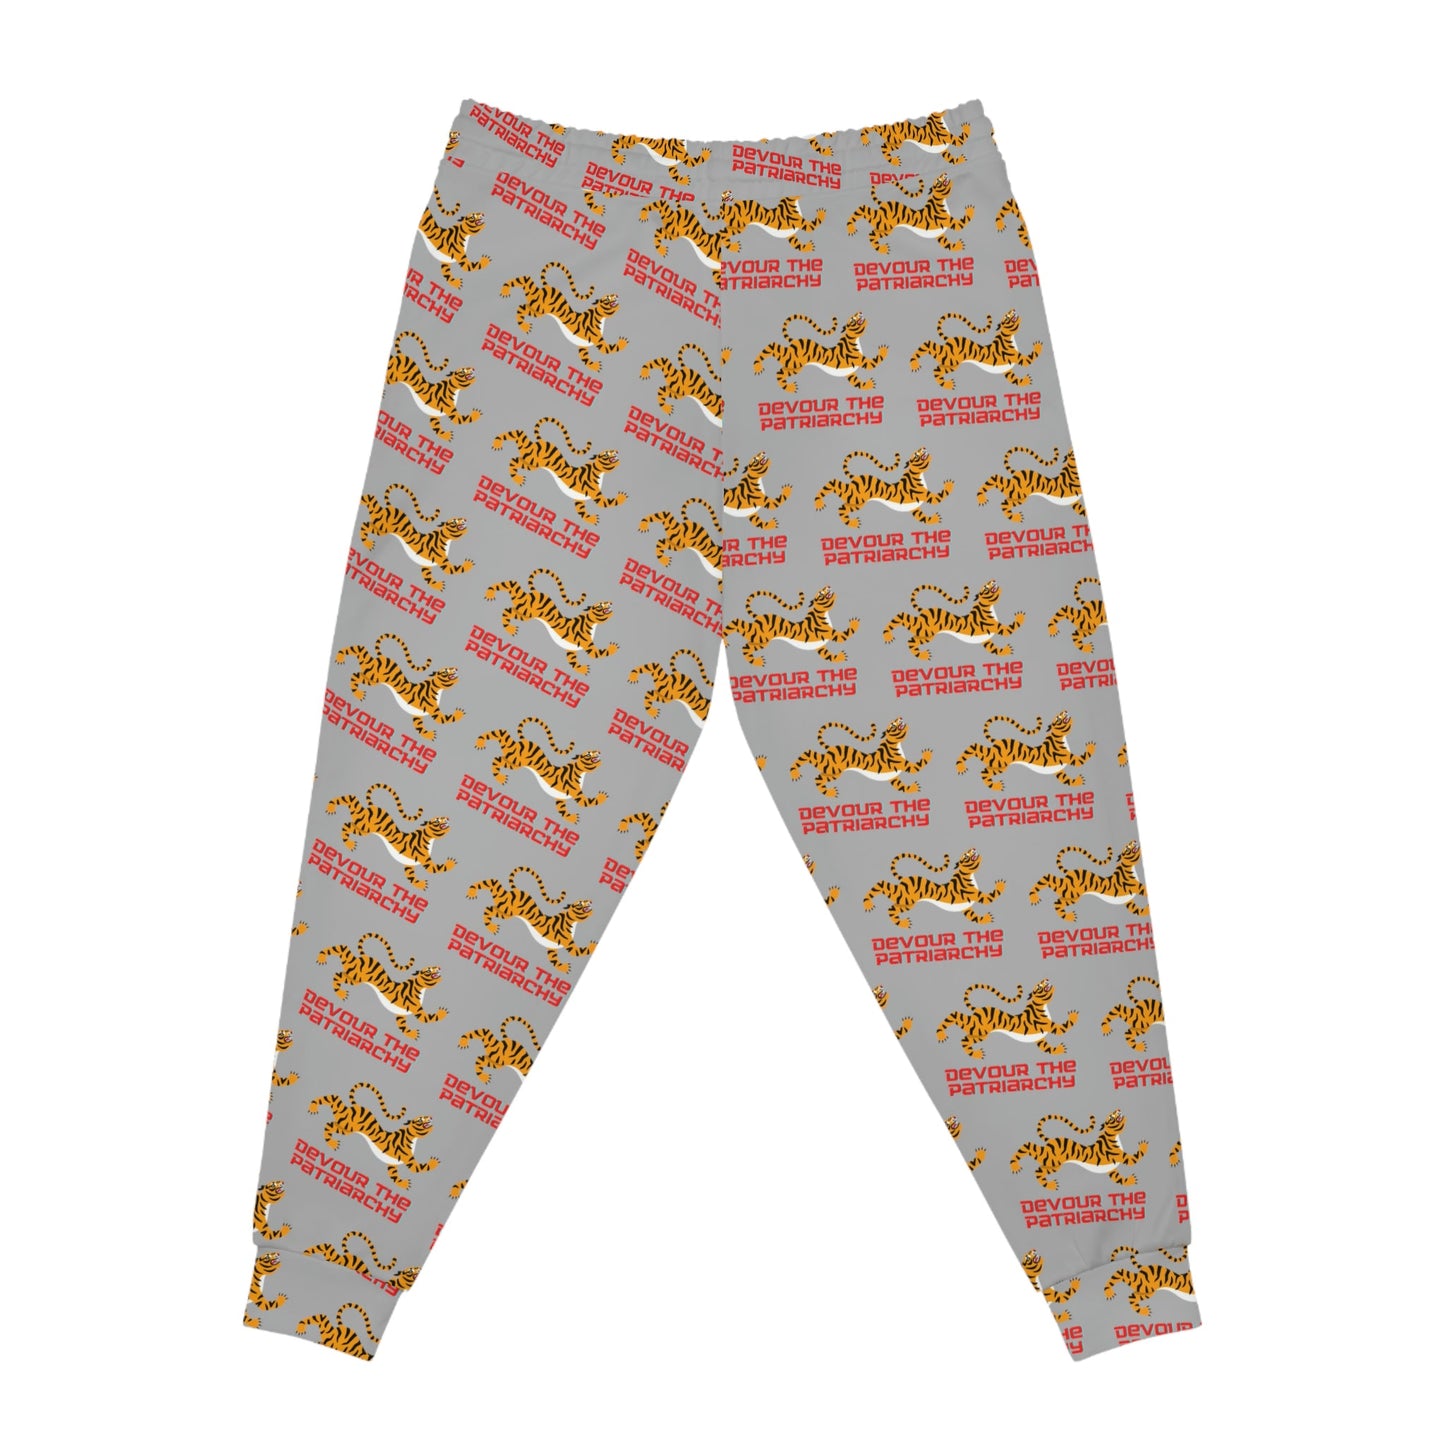 Devour the Patriarchy 🐅 Women's Feminist Themed Athletic Jogger Pants